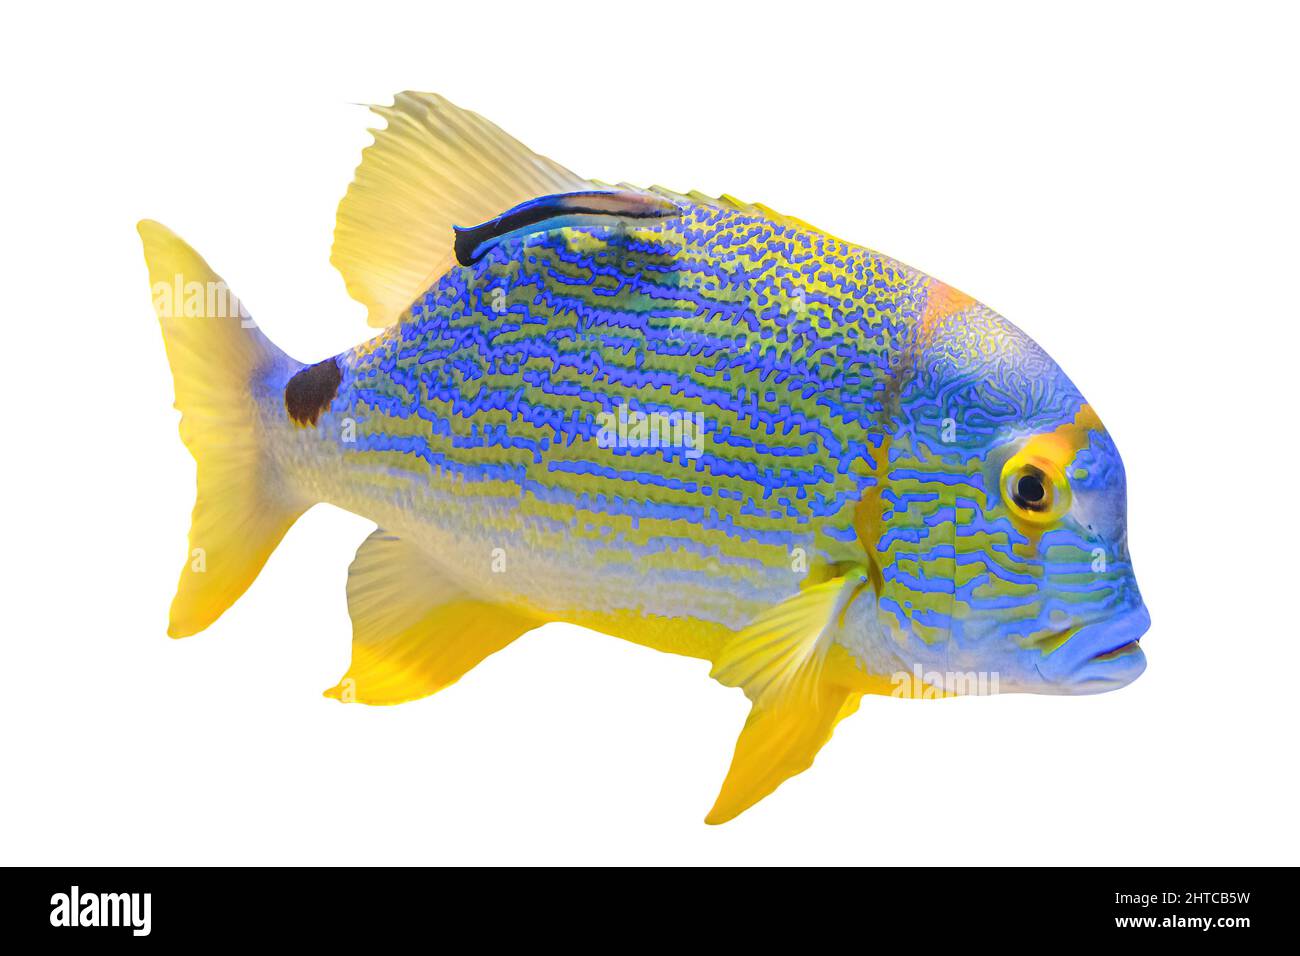 Sailfin snapper fish or blue-lined sea bream isolated on white background. Symphorichthys spilurus species living in Indian Ocean and western Pacific Stock Photo